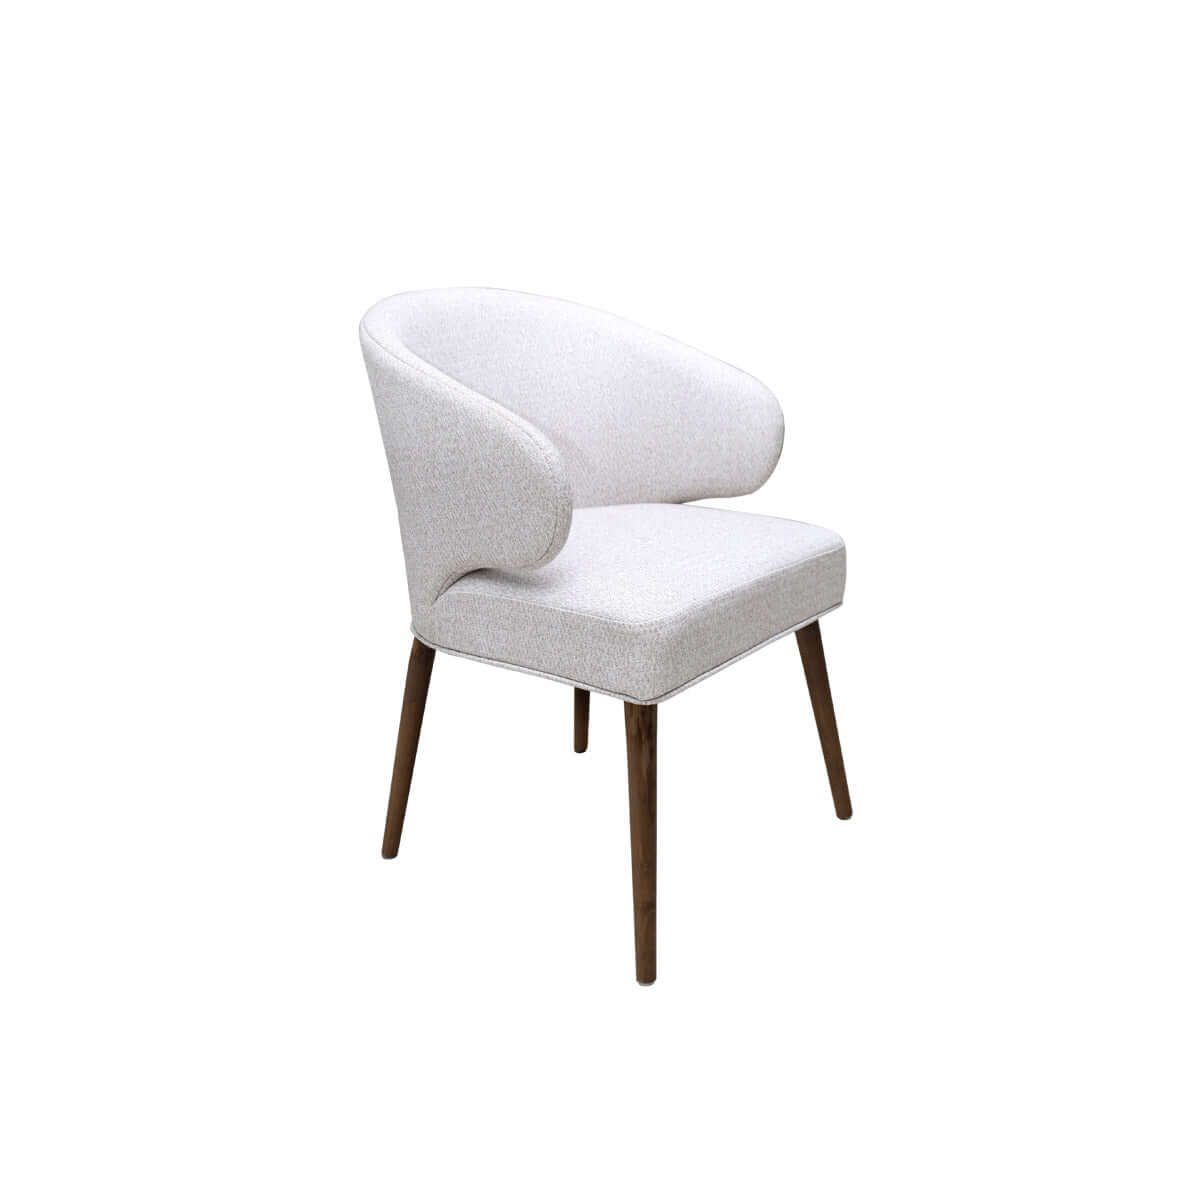 indonesia online furniture - dining chair with curved, lower backrest